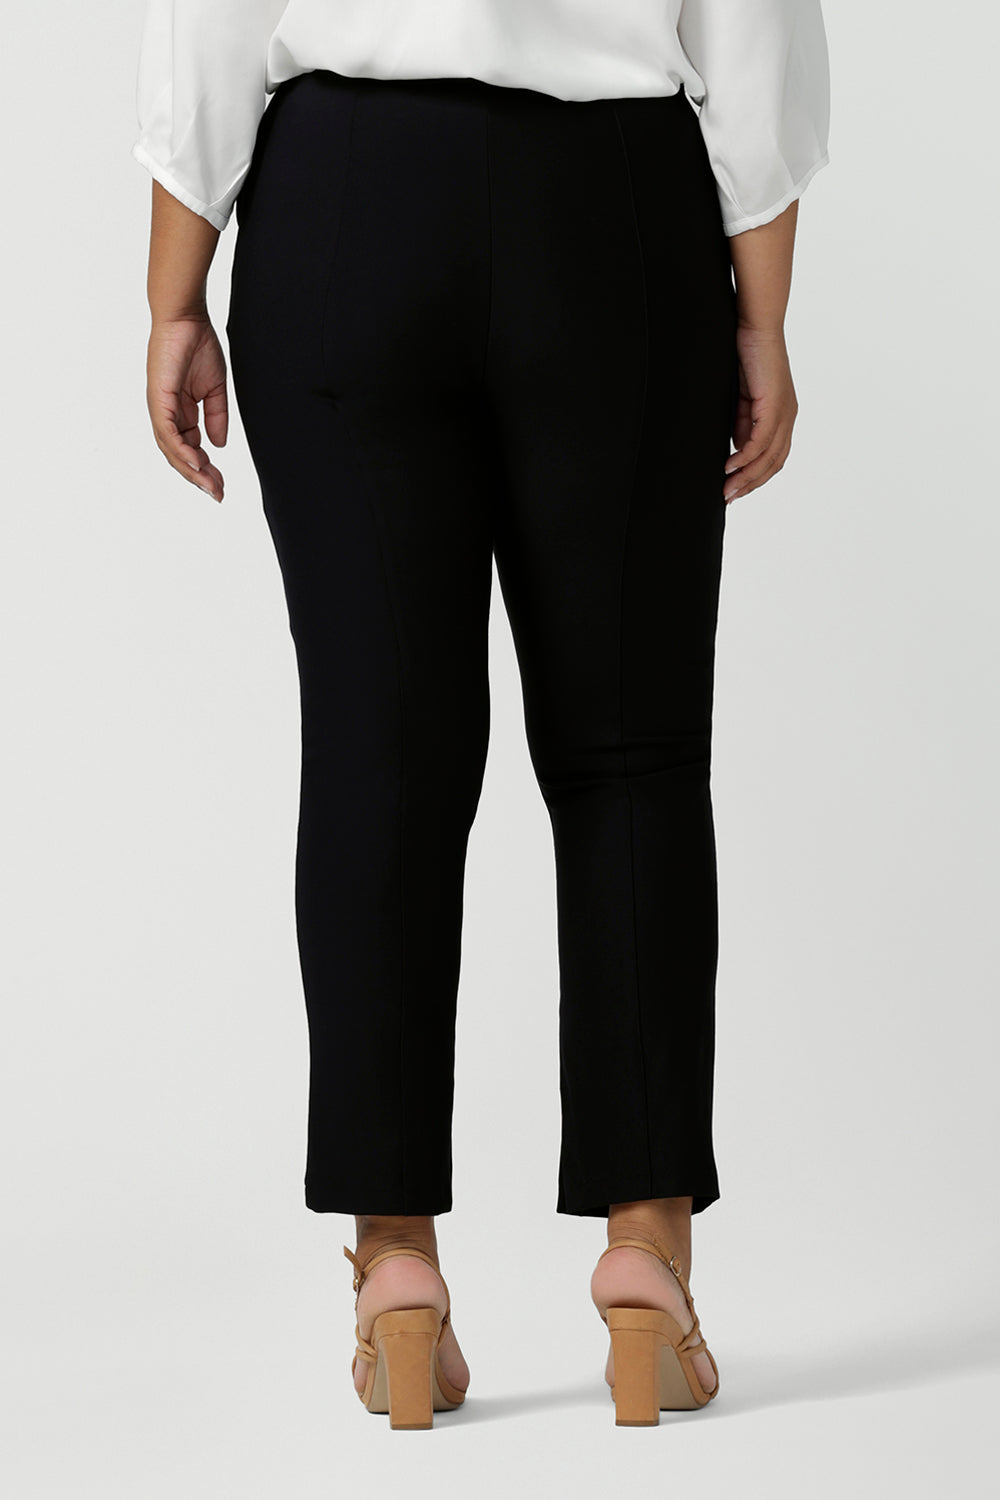 Back view of a fuller figure woman wearing mid-rise, slim leg navy pants by Australian and New Zealand women's clothing label, L&F. These skinny workwear trousers have a concealed zip fastening and side pockets. Worn with a 3/4 sleeve white women's shirt. Shop these navy workwear pants in an inclusive size range of 8 to 24.